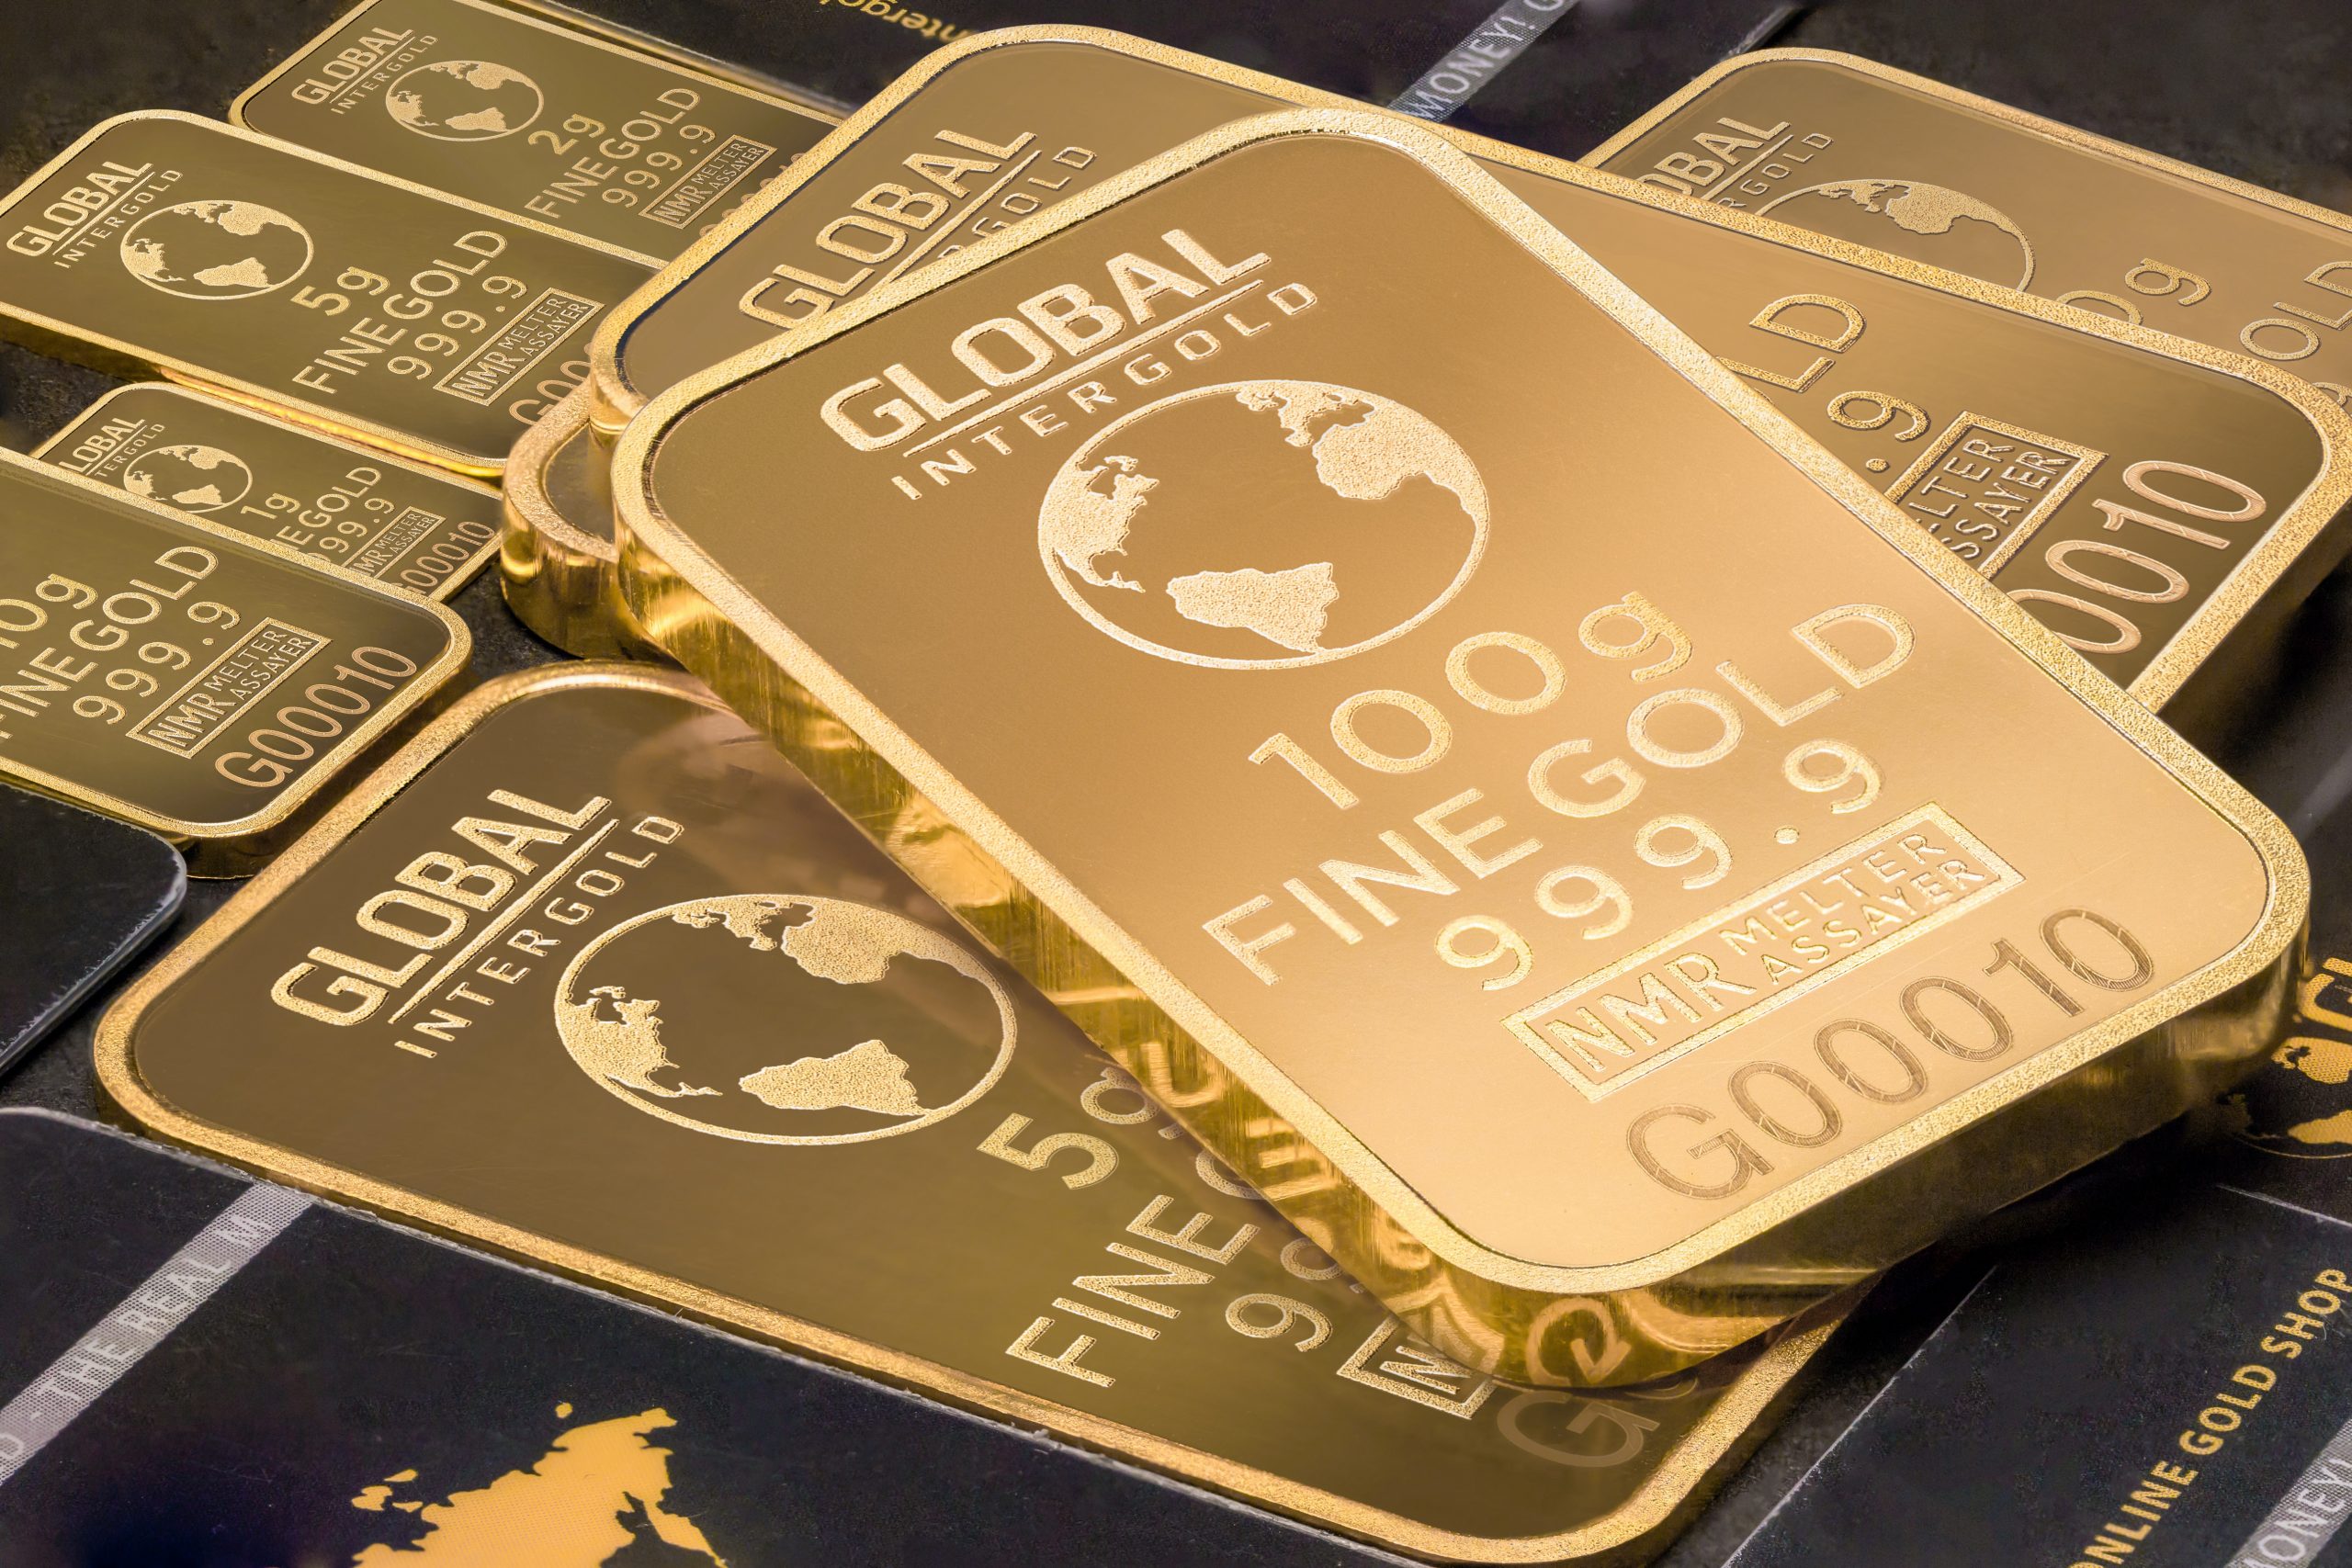 Physical Gold vs. Gold ETFs (like $GLD) – Where Should You Invest?